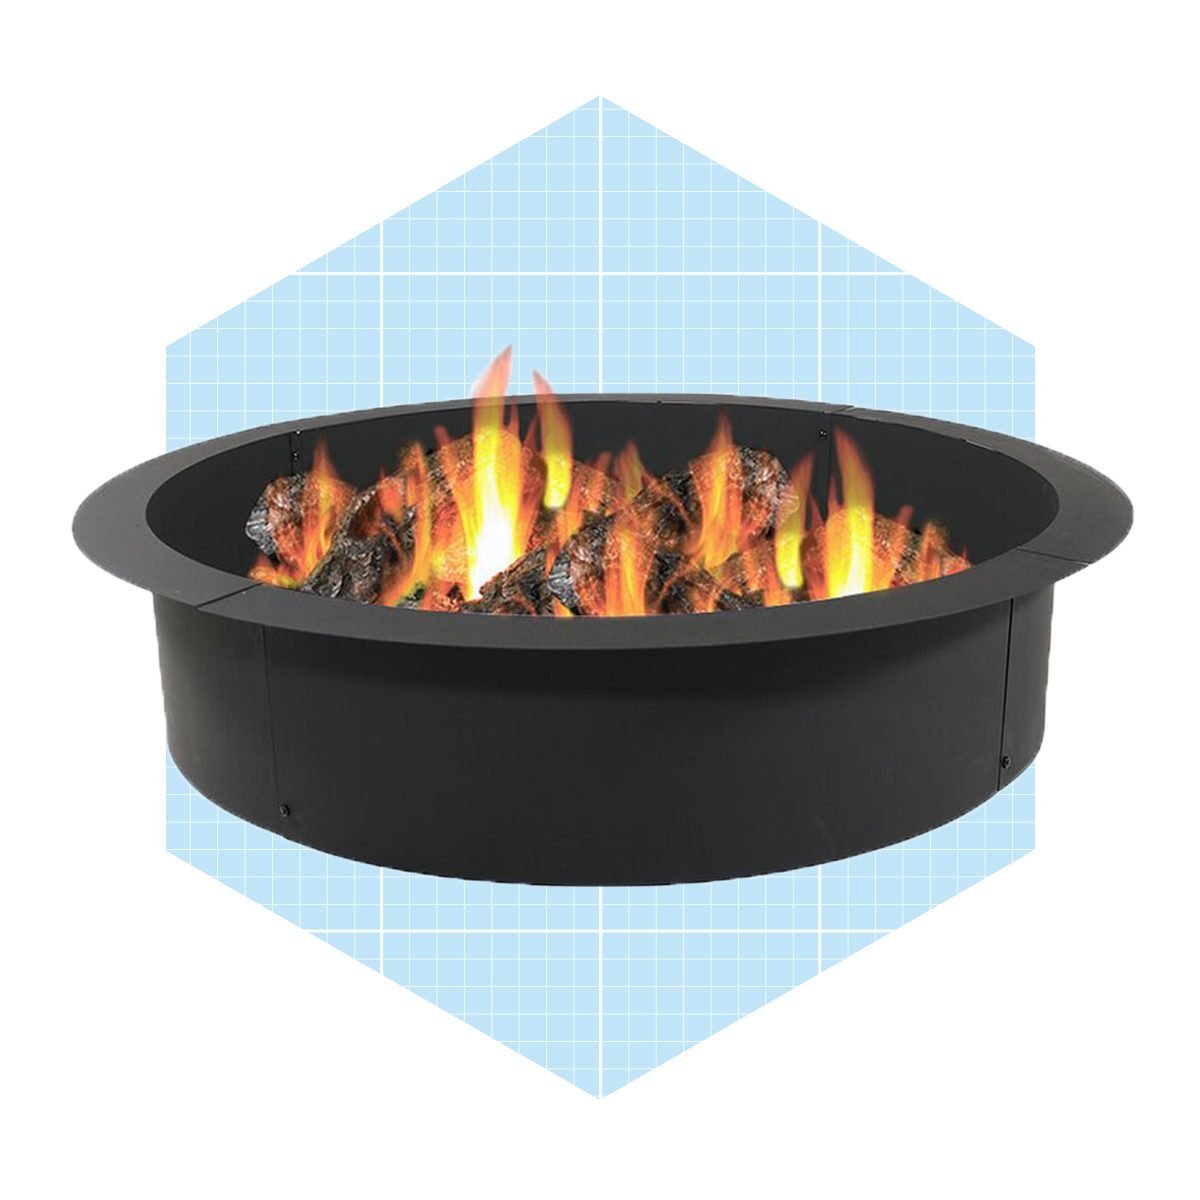 Natalia 10'' H X 45'' W Steel Wood Burning Outdoor Fire Ring